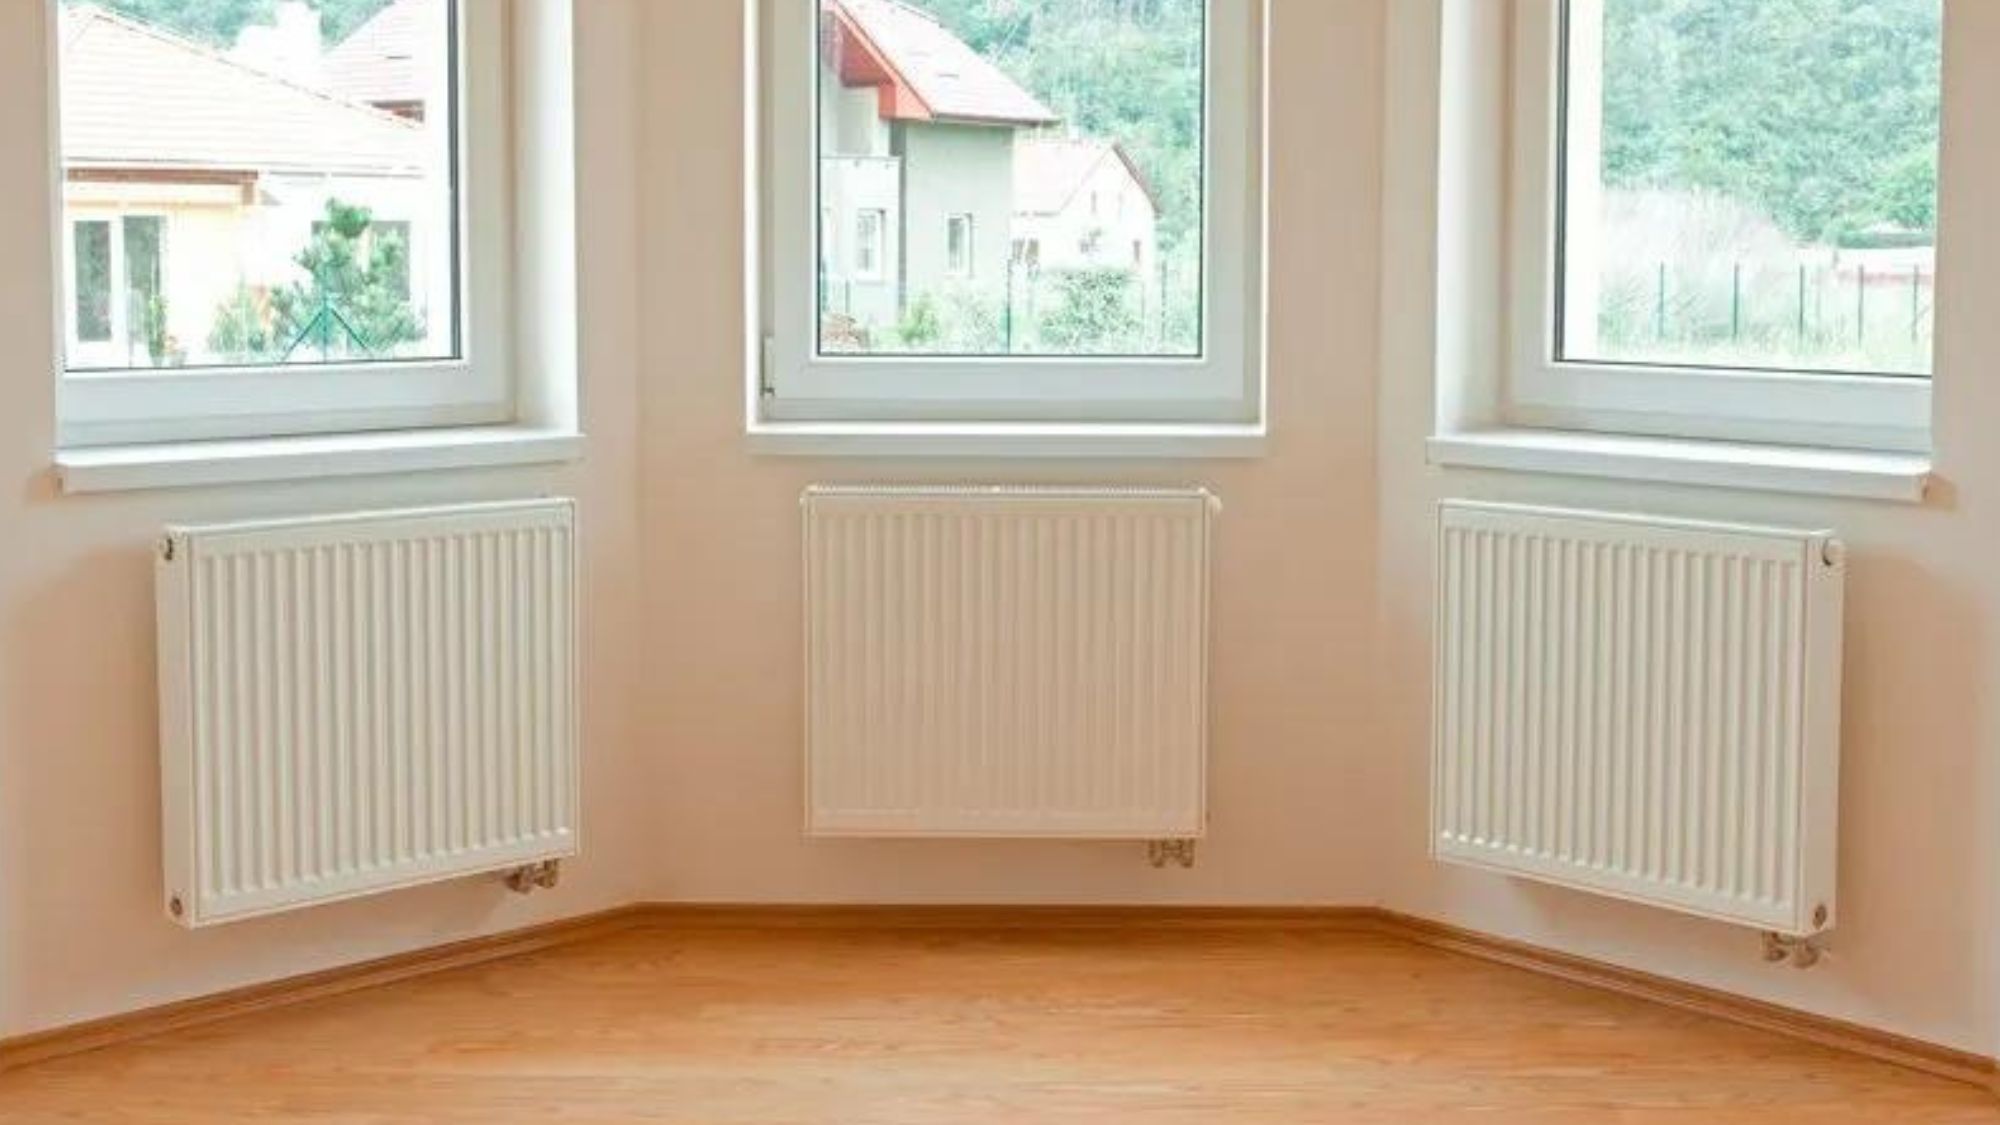 An assortment of eco-friendly radiators in a room